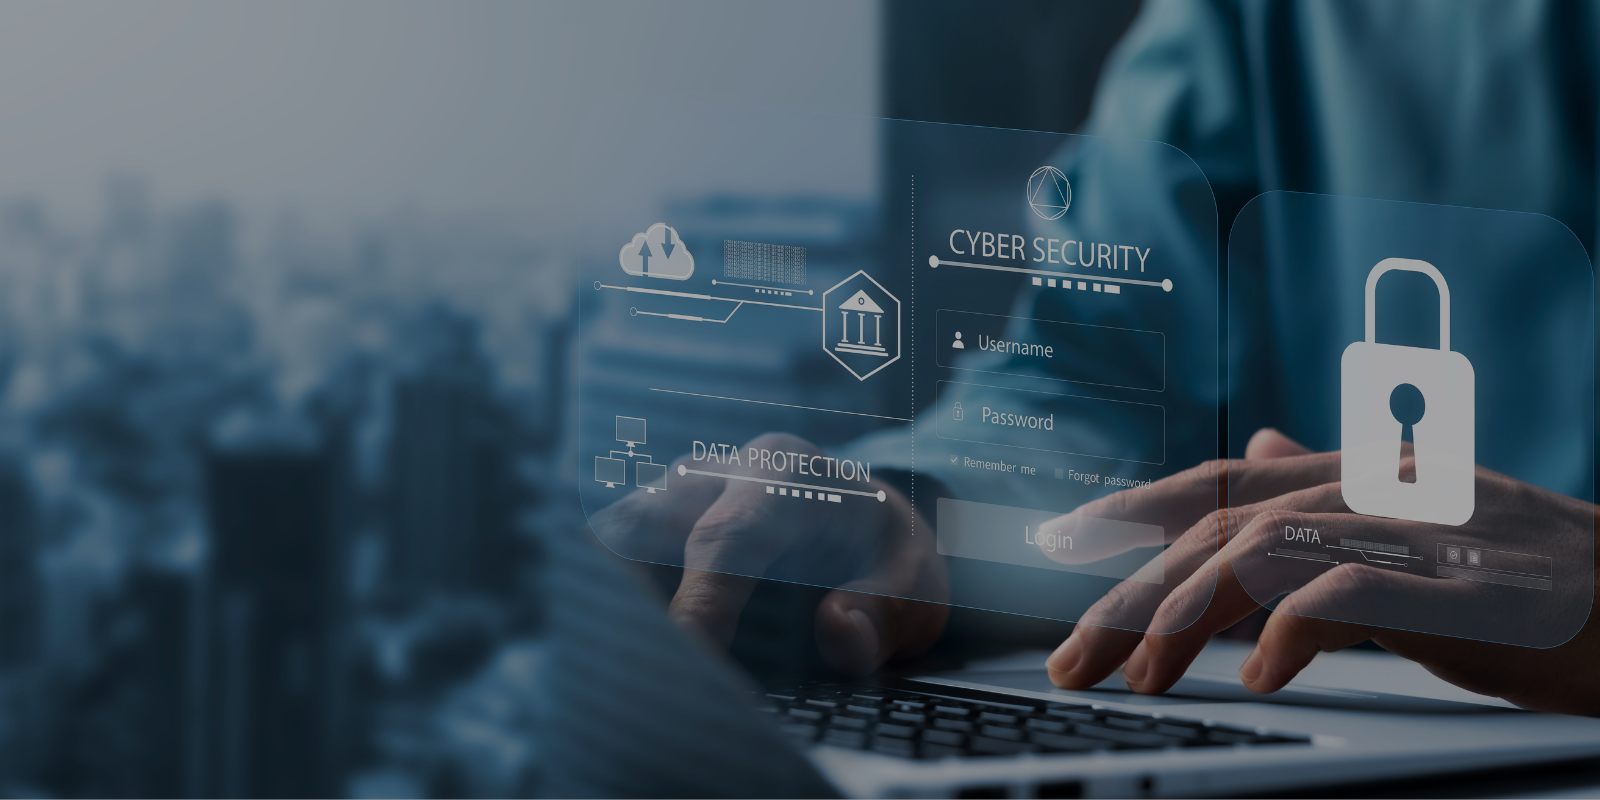 Developing Digital Technology Standards for Private Security Companies